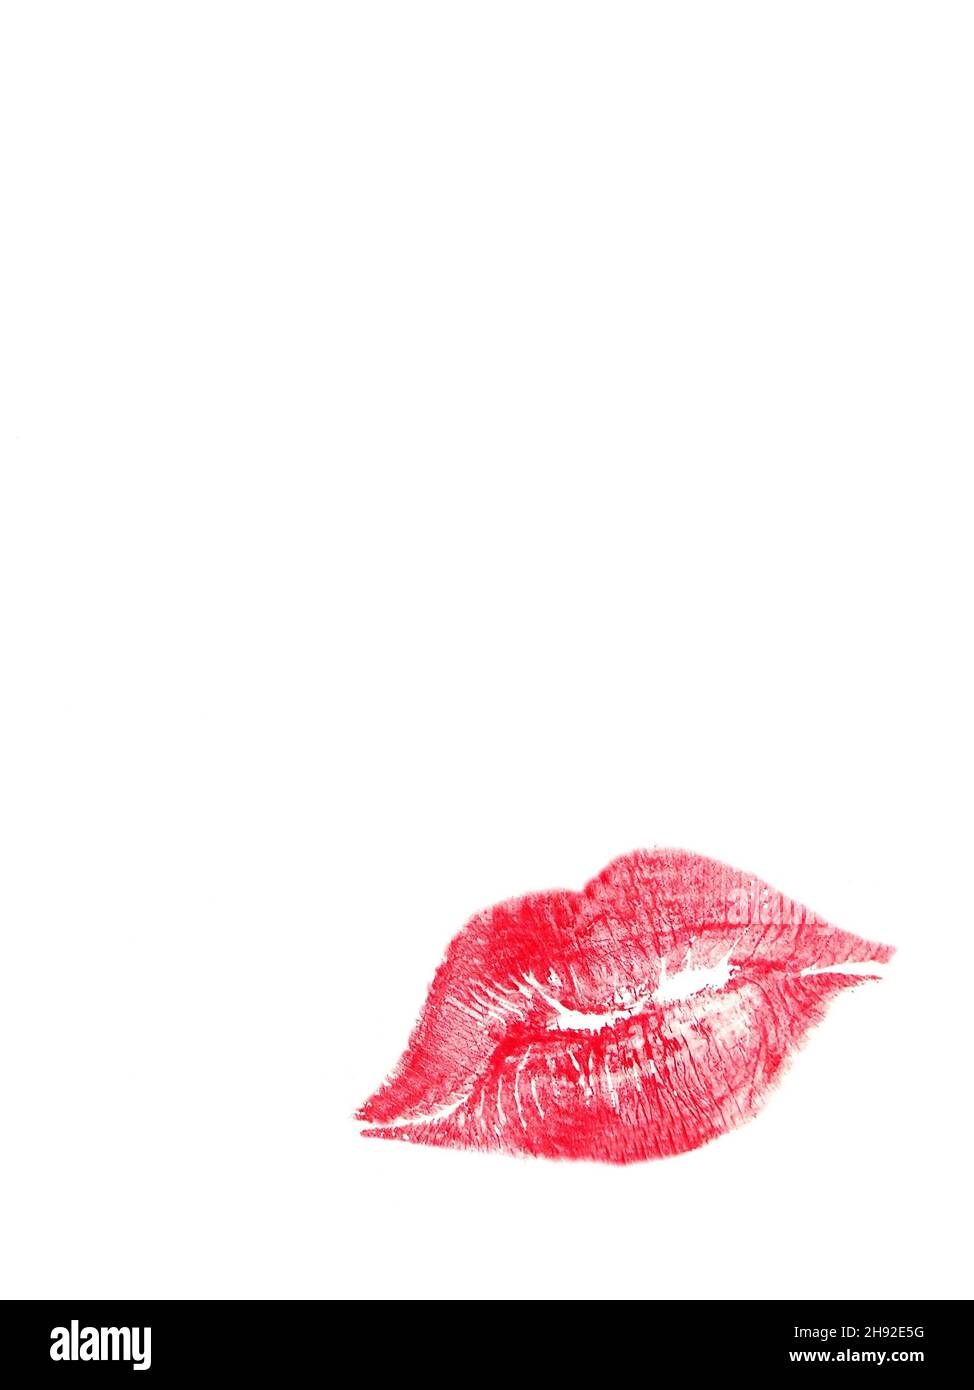 Lipstick kiss isolated on white background with plenty space for text Stock Photo